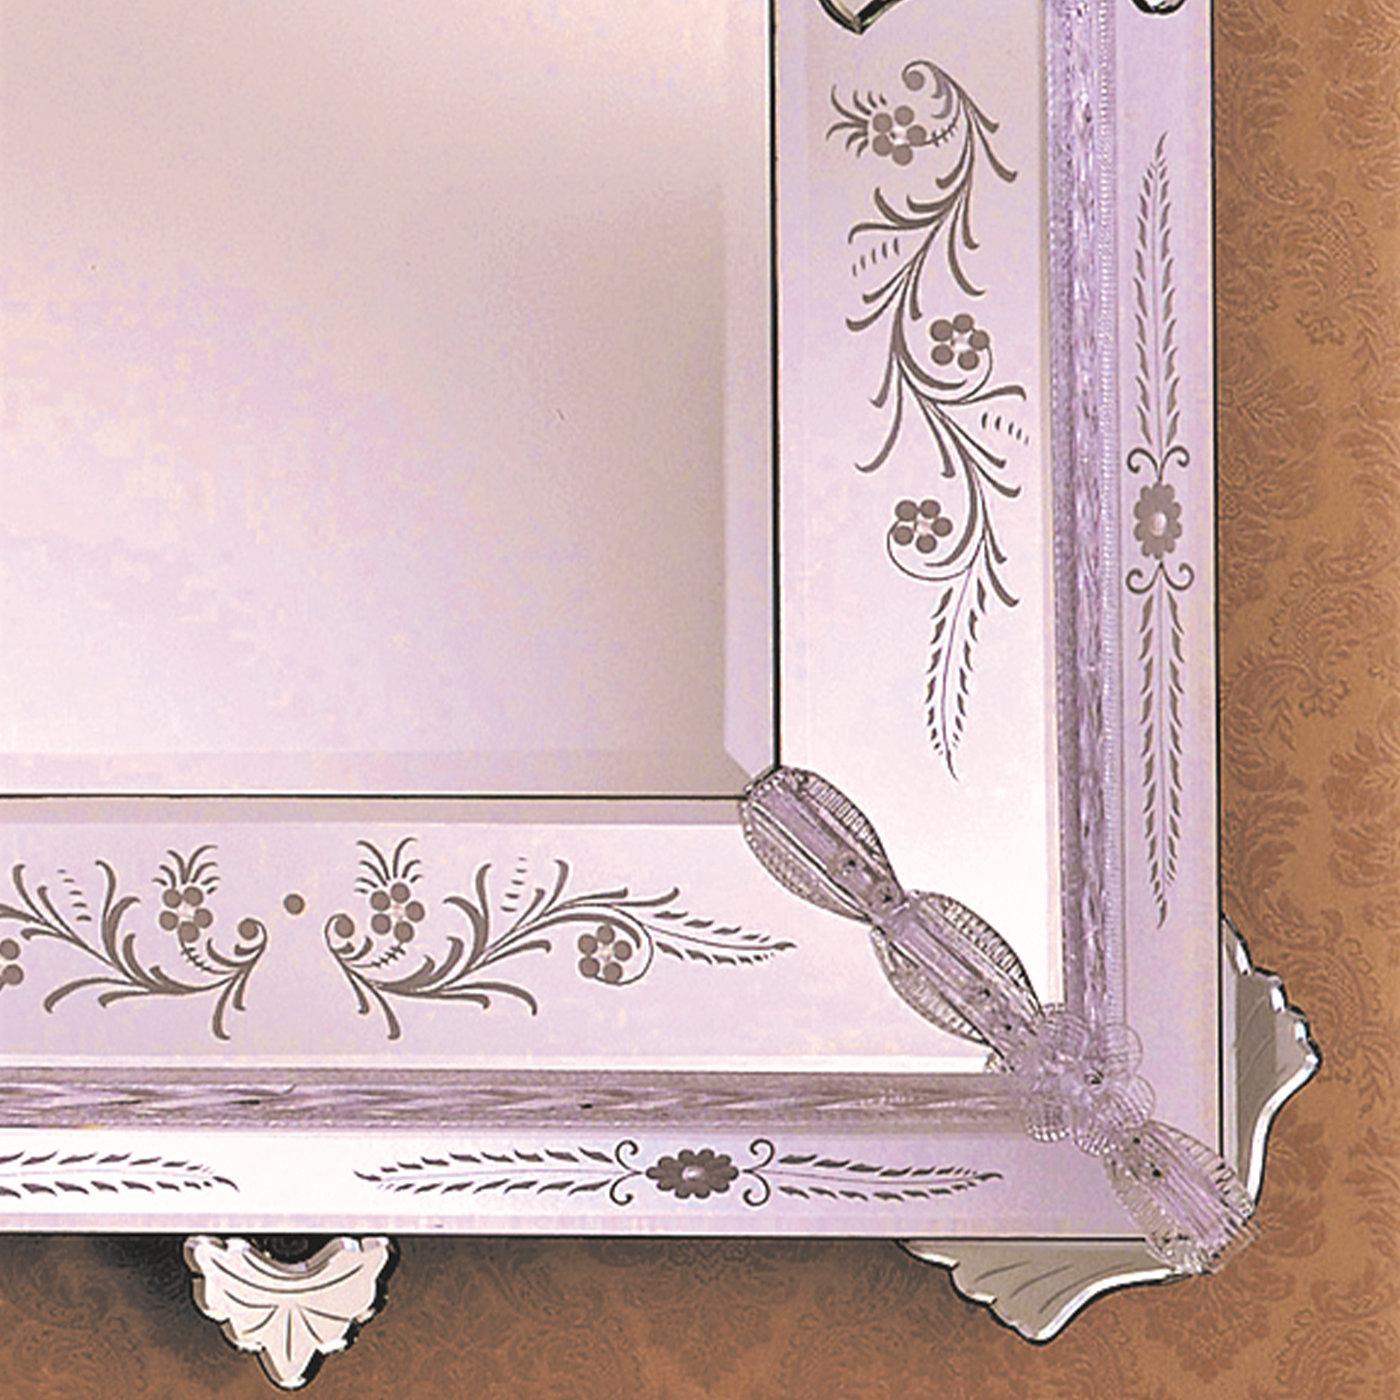 This rectangular mirror is a showcase of unrivaled craftsmanship achieved by Murano master glassmakers according to traditional 14th-century techniques. The frame is adorned with elegant leaves and flowers in transparent and silver Murano glass.